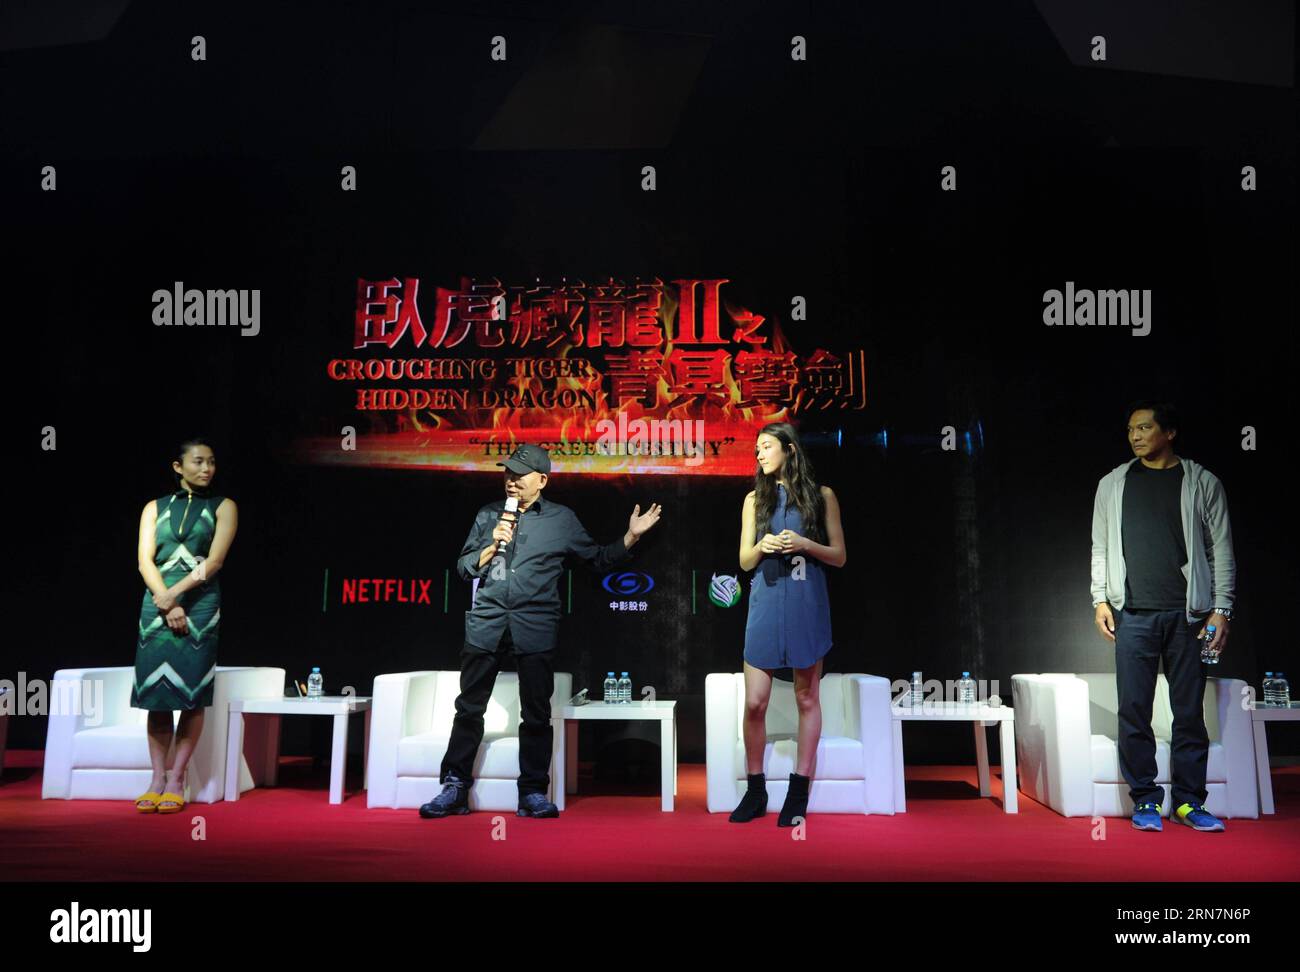 (150914) -- BEIJING, Sept. 14, 2015 -- Director Yuen Woo-ping (2nd L) introduces his creator team of the film Crouching Tiger Hidden Dragon II during a press conference in Beijing, capital of China, Sept. 14, 2015. The film will be on show on Feb. 8, 2016 in Chinese mainland. )(mcg) CHINA-BEIJING-FILM CROUCHING TIGER HIDDEN DRAGON II -PRESS CONFERENCE (CN) MaxYan PUBLICATIONxNOTxINxCHN   150914 Beijing Sept 14 2015 Director Yuen Woo Ping 2nd l introduces His Creator Team of The Film Crouching Tiger Hidden Dragon II during a Press Conference in Beijing Capital of China Sept 14 2015 The Film wil Stock Photo